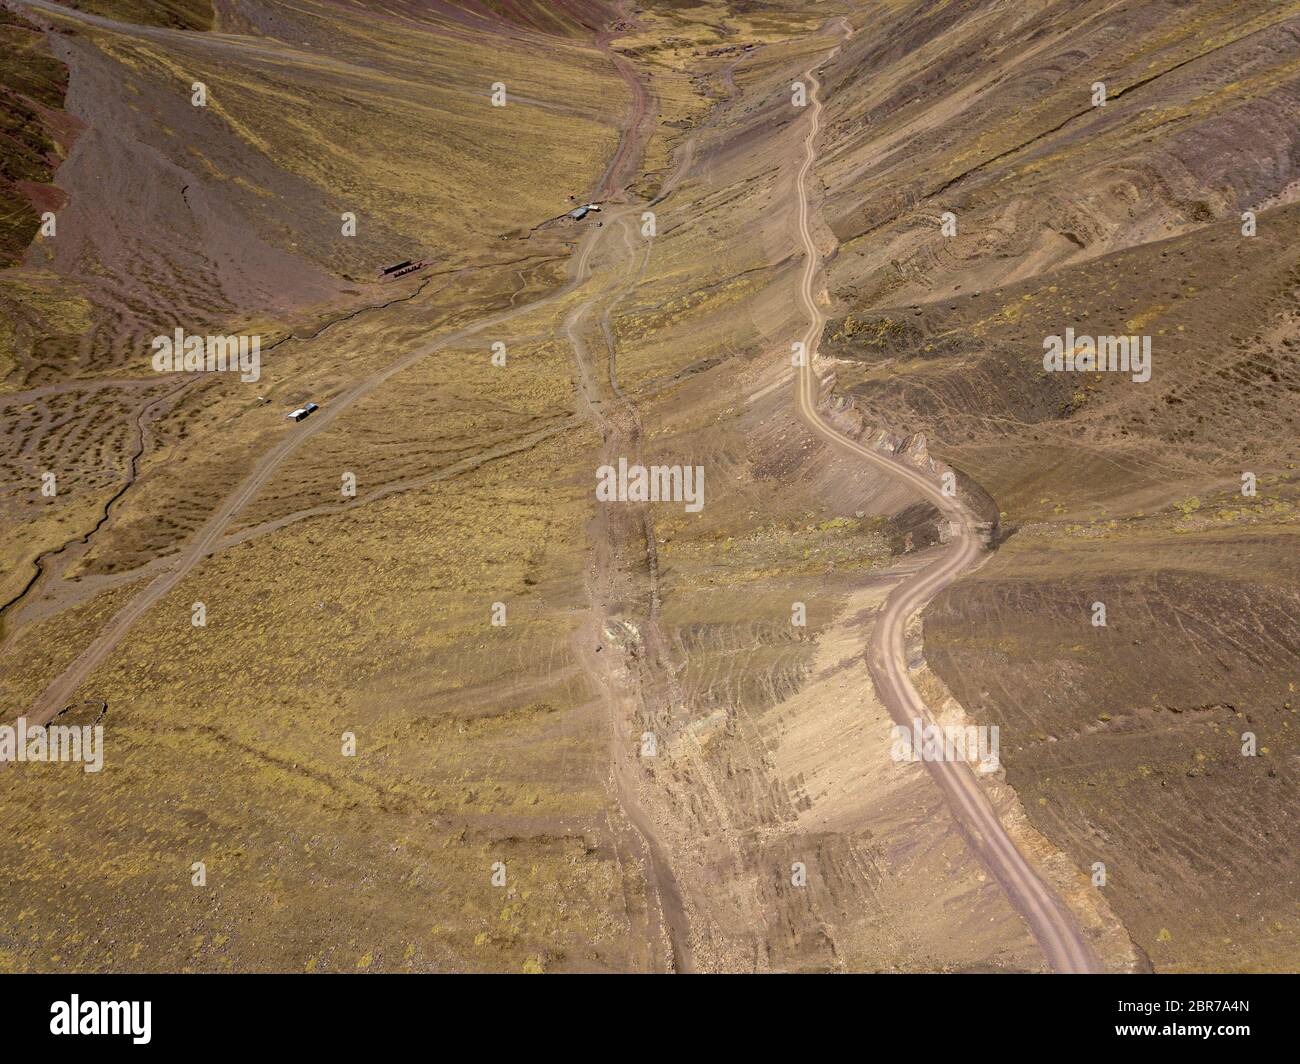 Aerial view of dangerous mountain road in Andes, Peru Stock Photo